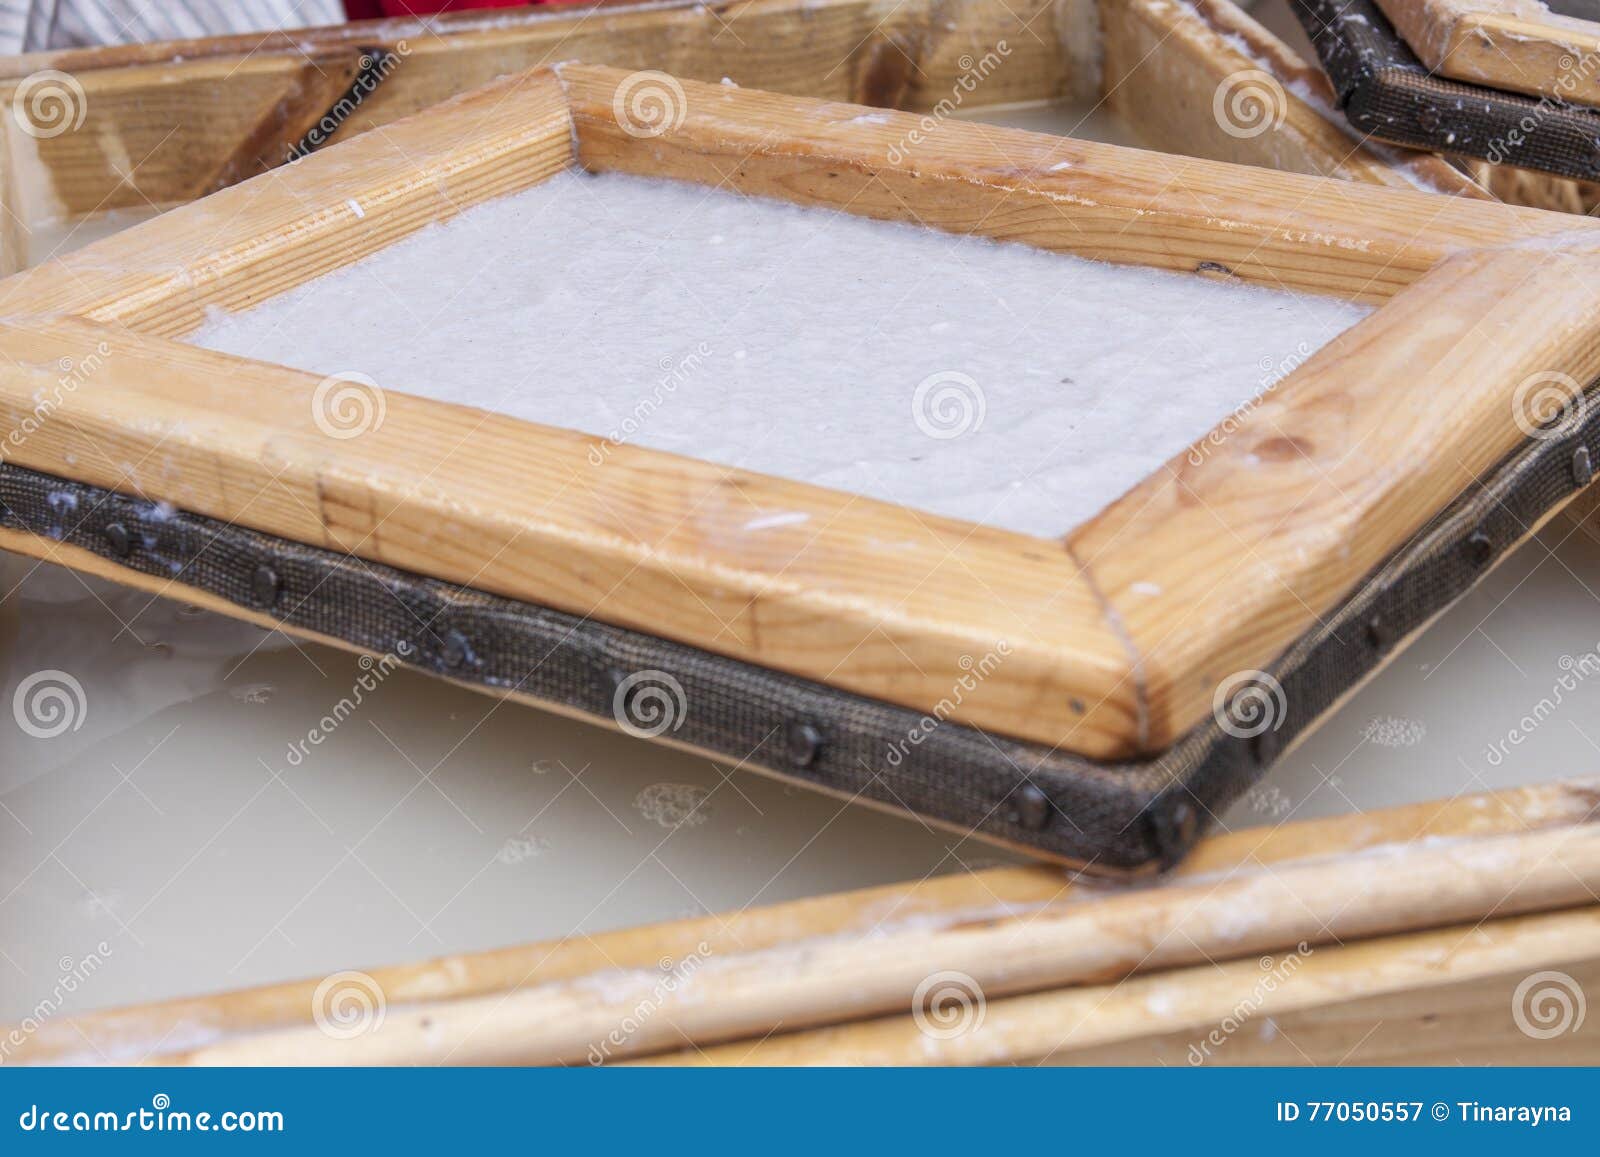 Traditional paper making stock image. Image of handmade - 77050557